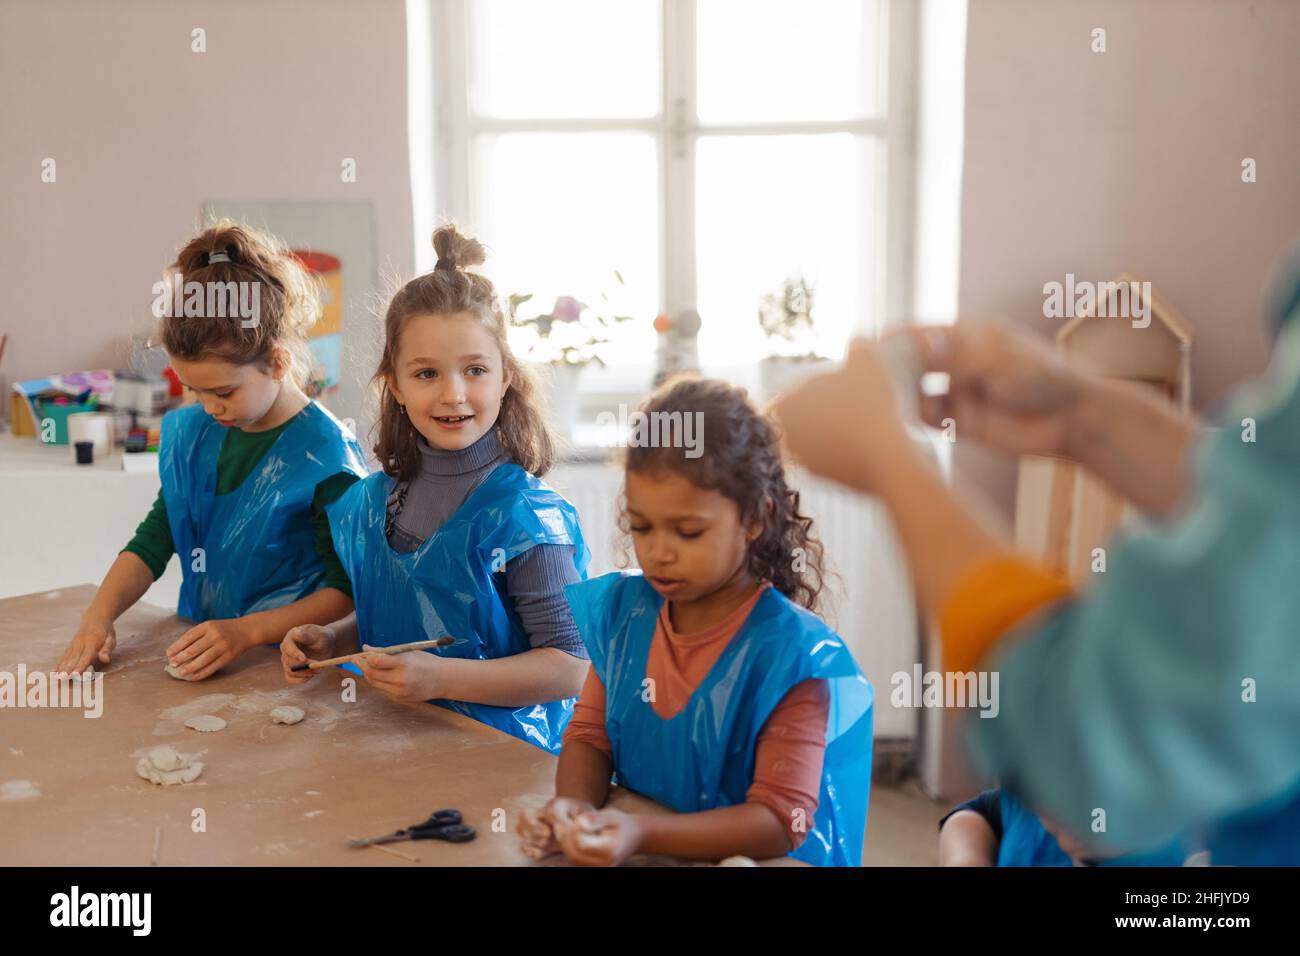 Group of little kids working with pottery clay during creative art and craft class at school. Stock Photo